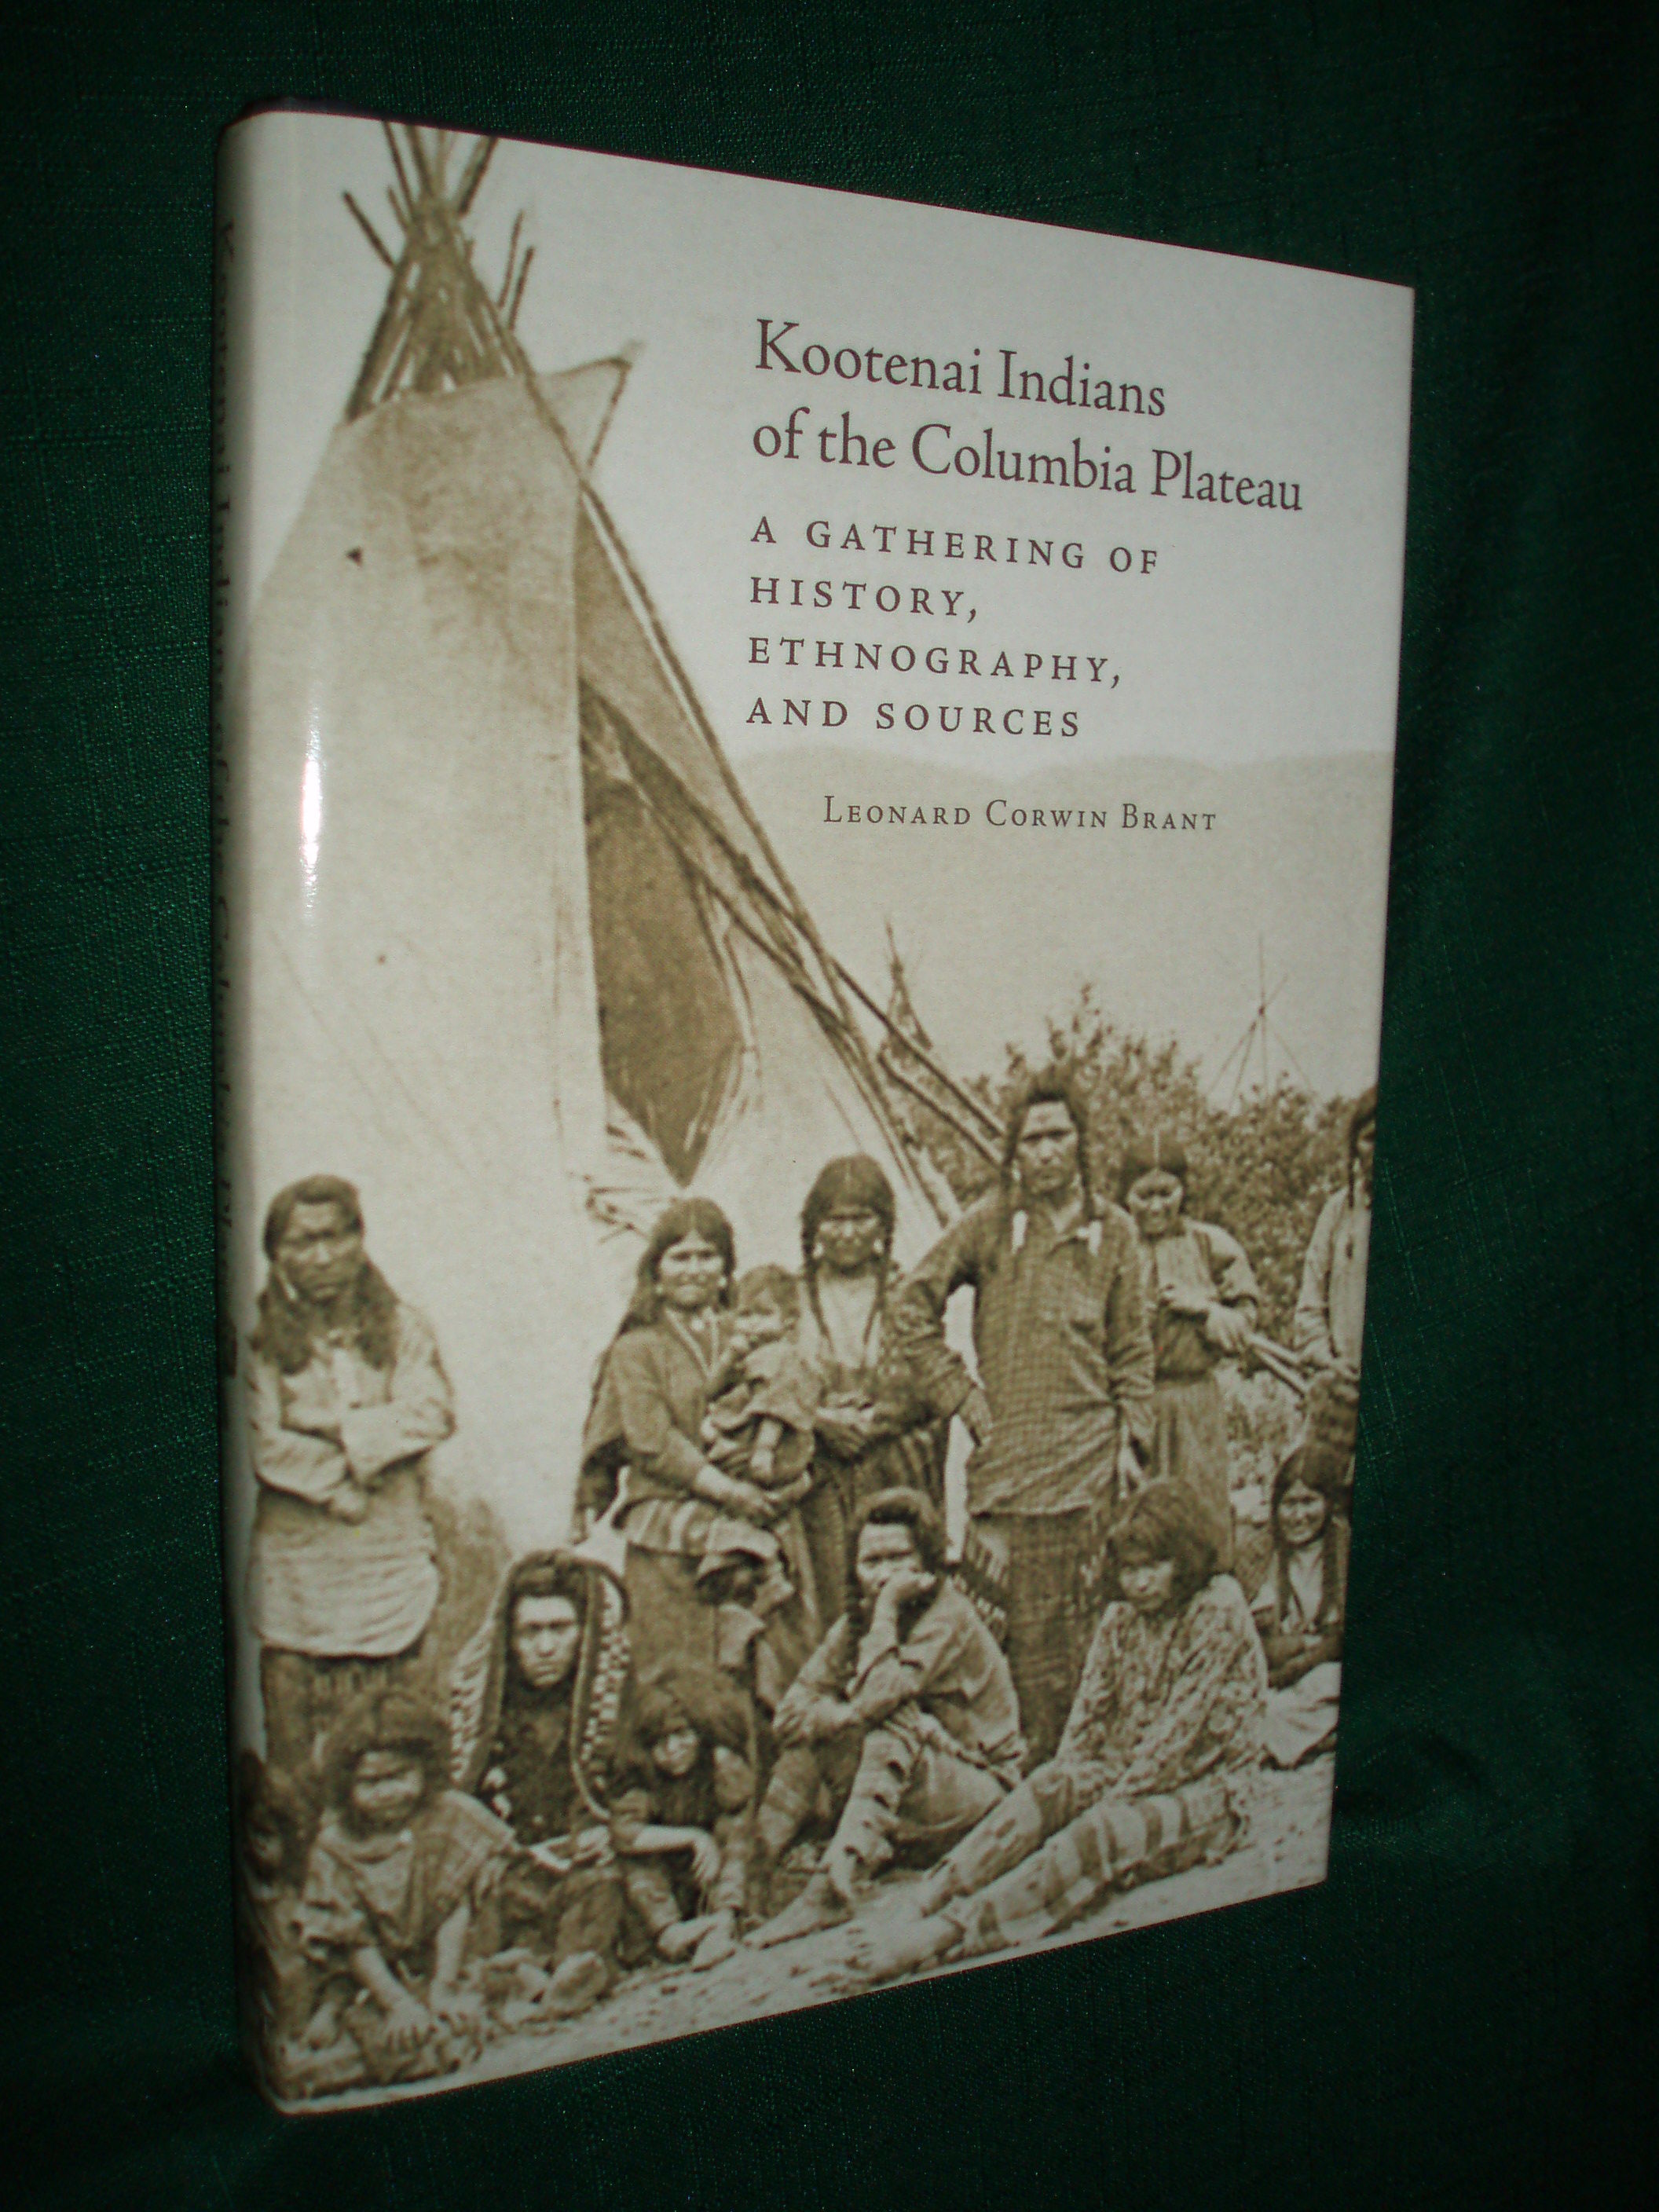 Kootenai Indians of the Columbia Plateau: A gathering of history, ethnography, and sources (book cover)